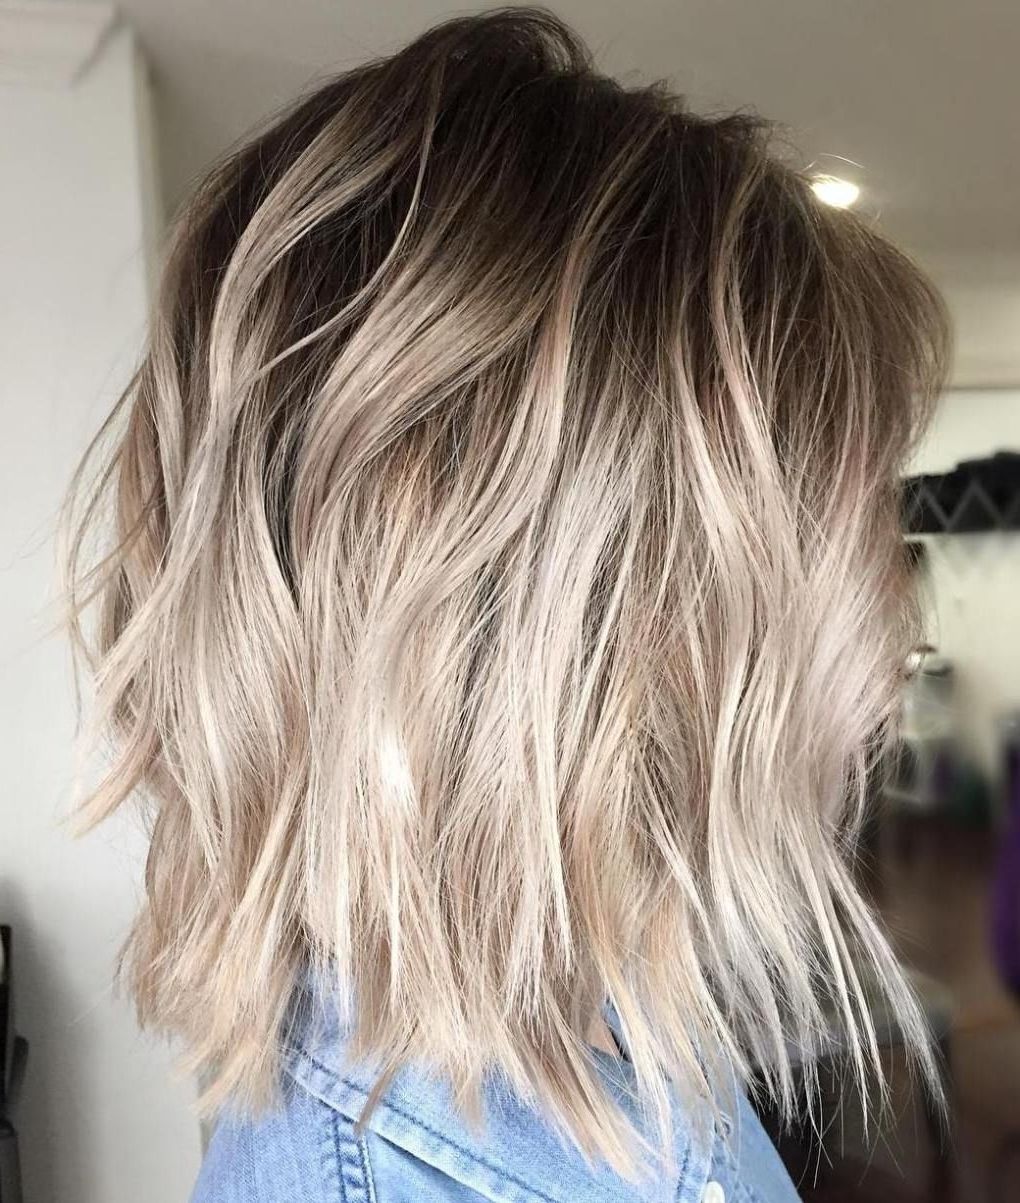 Projects To Try In 2018 Platinum Blonde Bob Hairstyles With Exposed Roots (View 3 of 20)